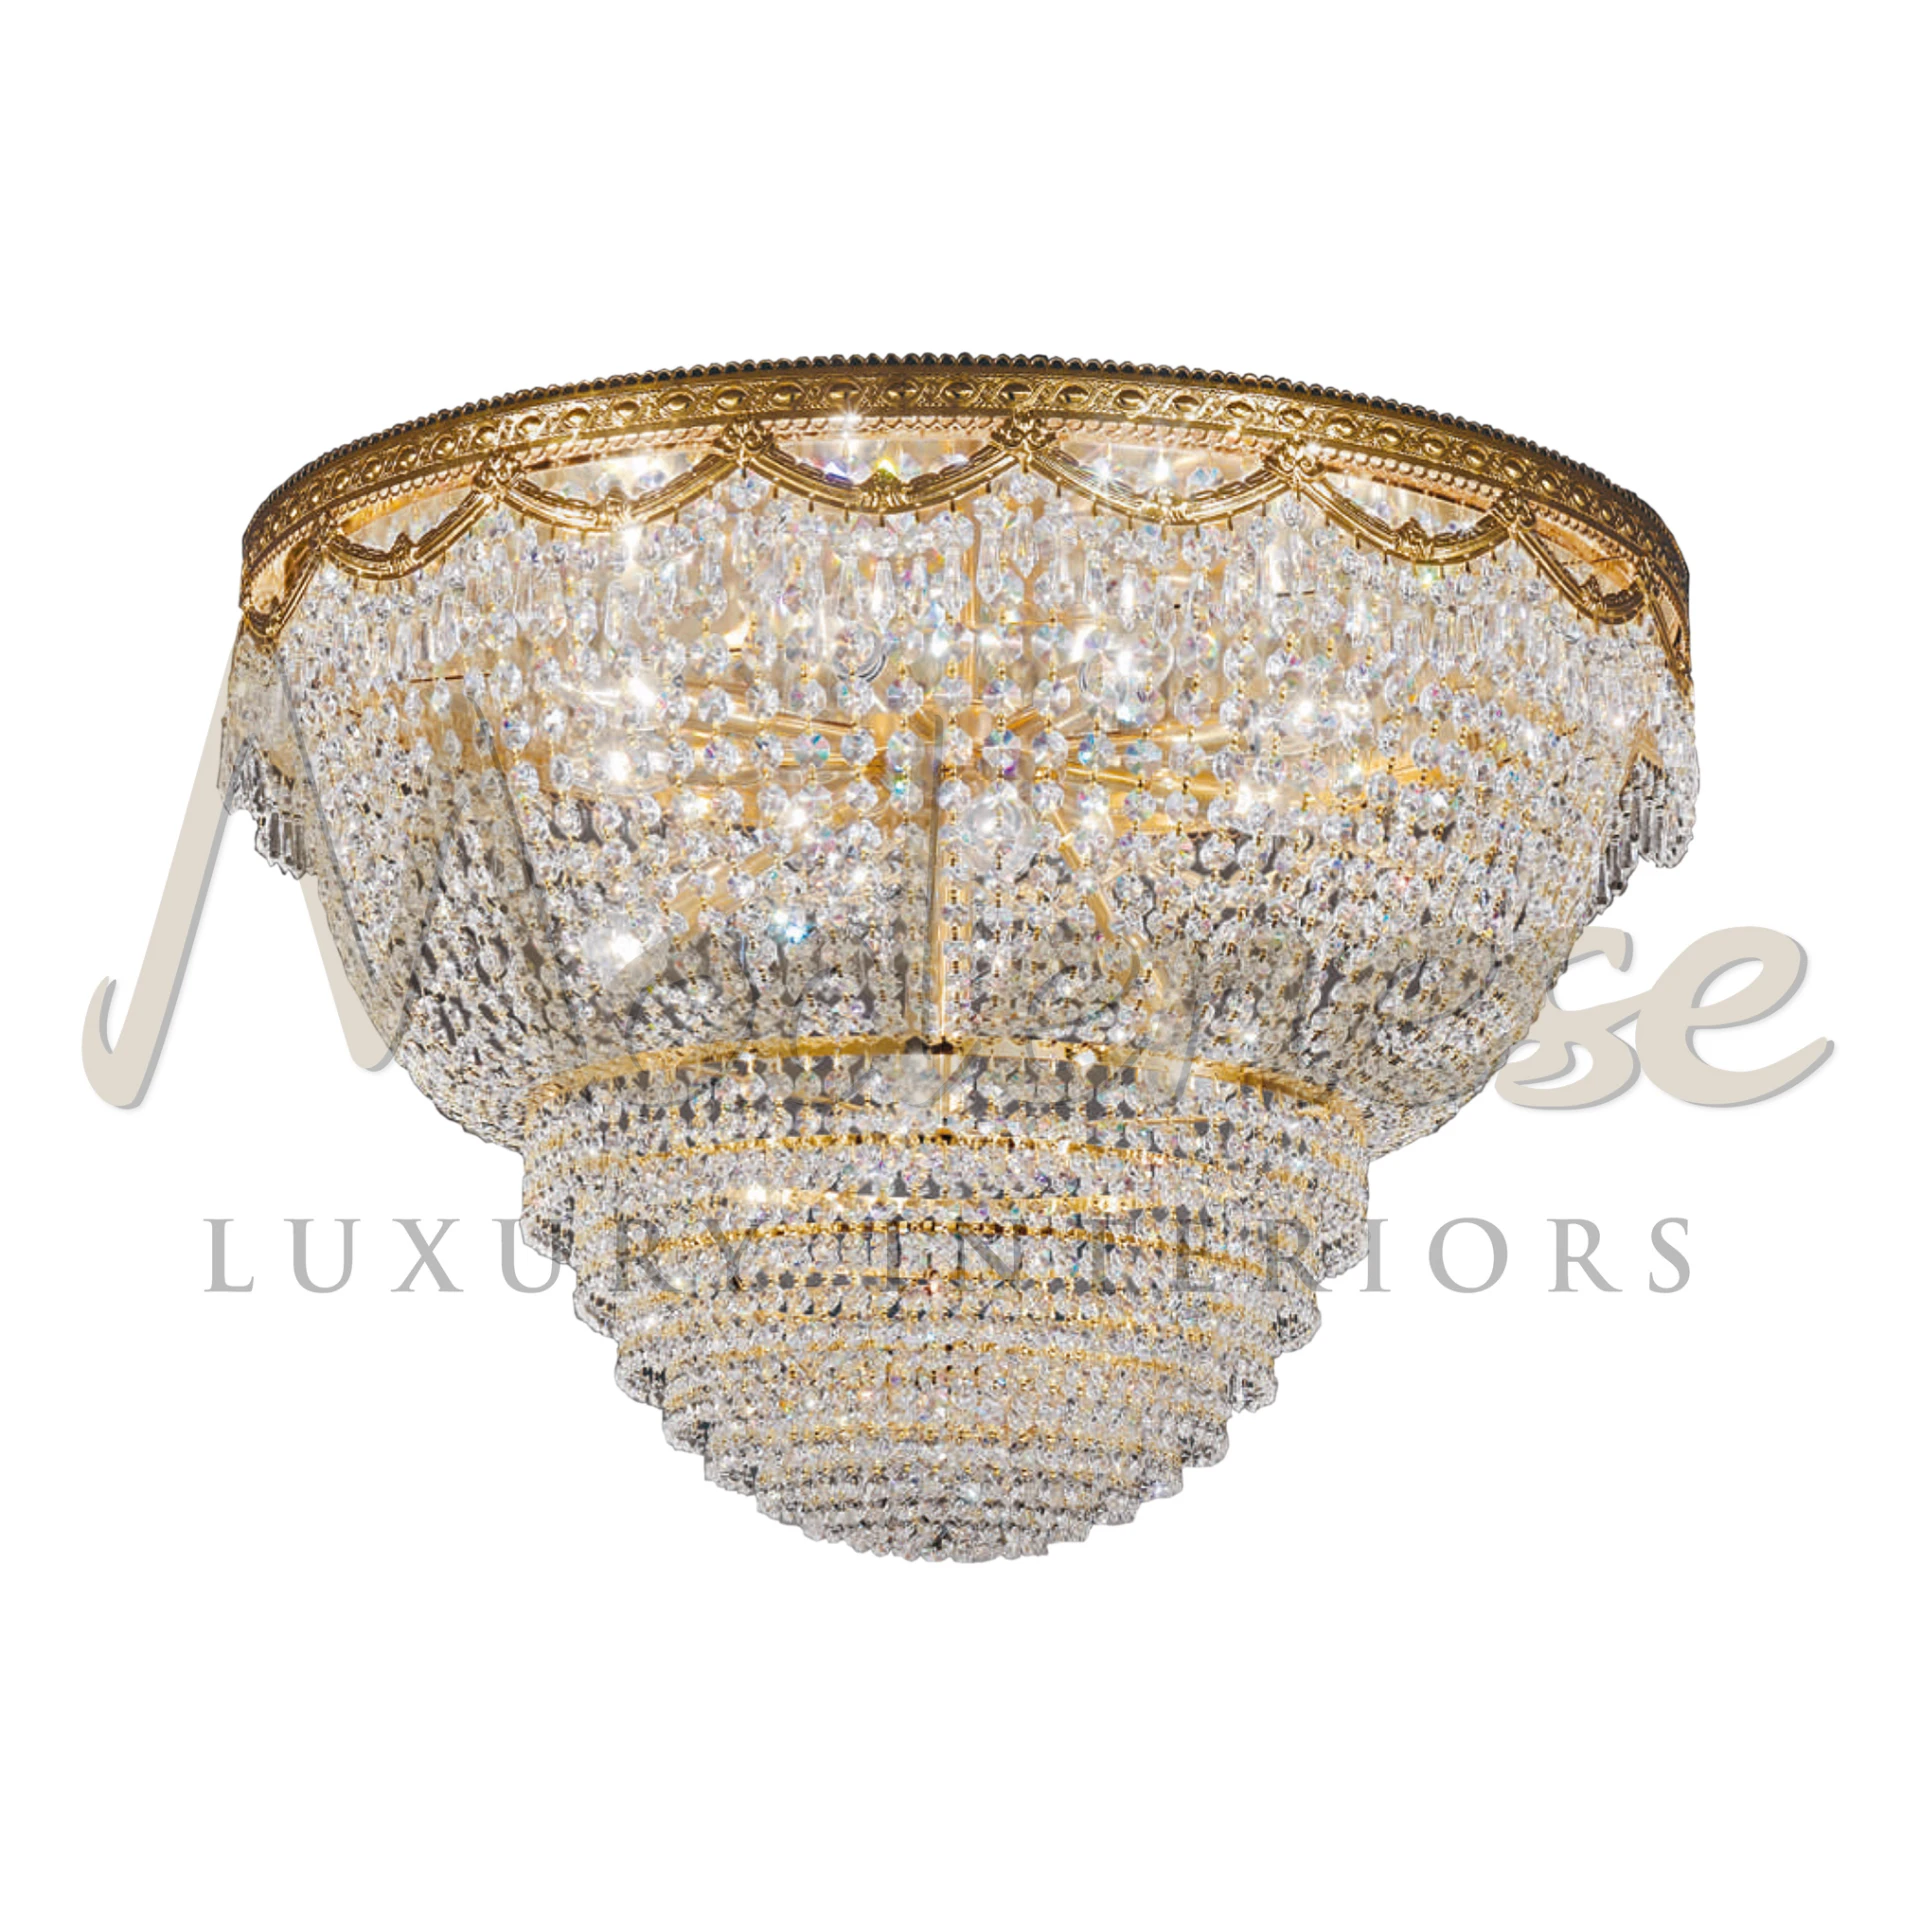 Lavish Grand Salon Lamp featuring a crystal covered dome with gold accent.